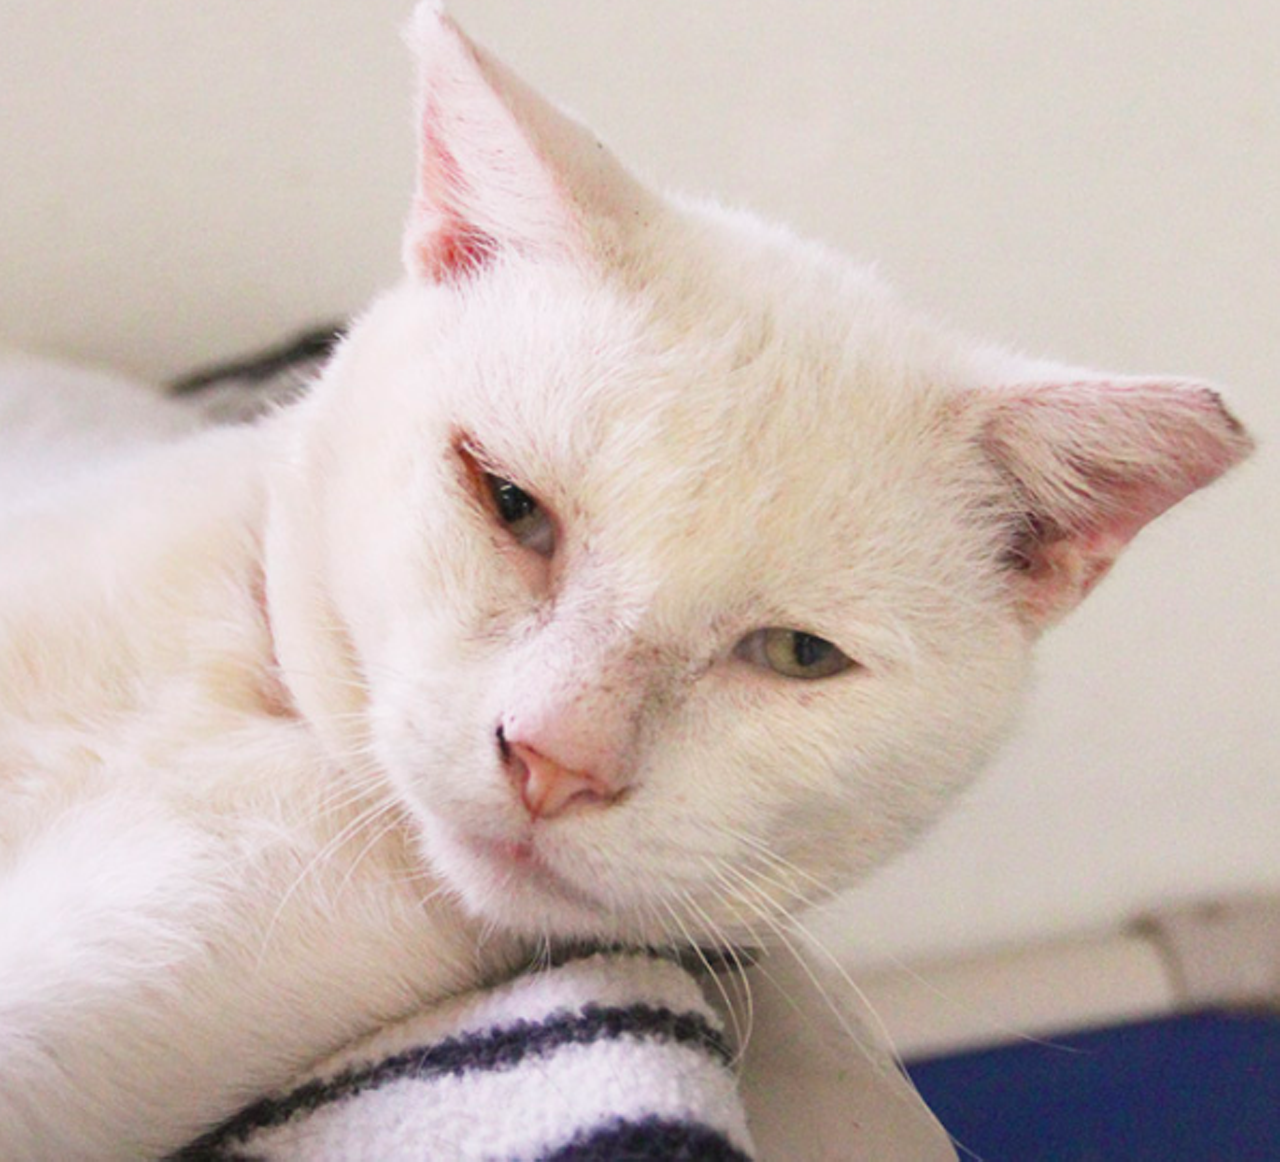 Jack
"Oh, hello. I am Jack and I am one cool cat! I love to lounge around in the cattery and sunbathe. I am easygoing and enjoy a good petting from the humans. If you’re looking for a chill and handsome cat, then I’m your man!"